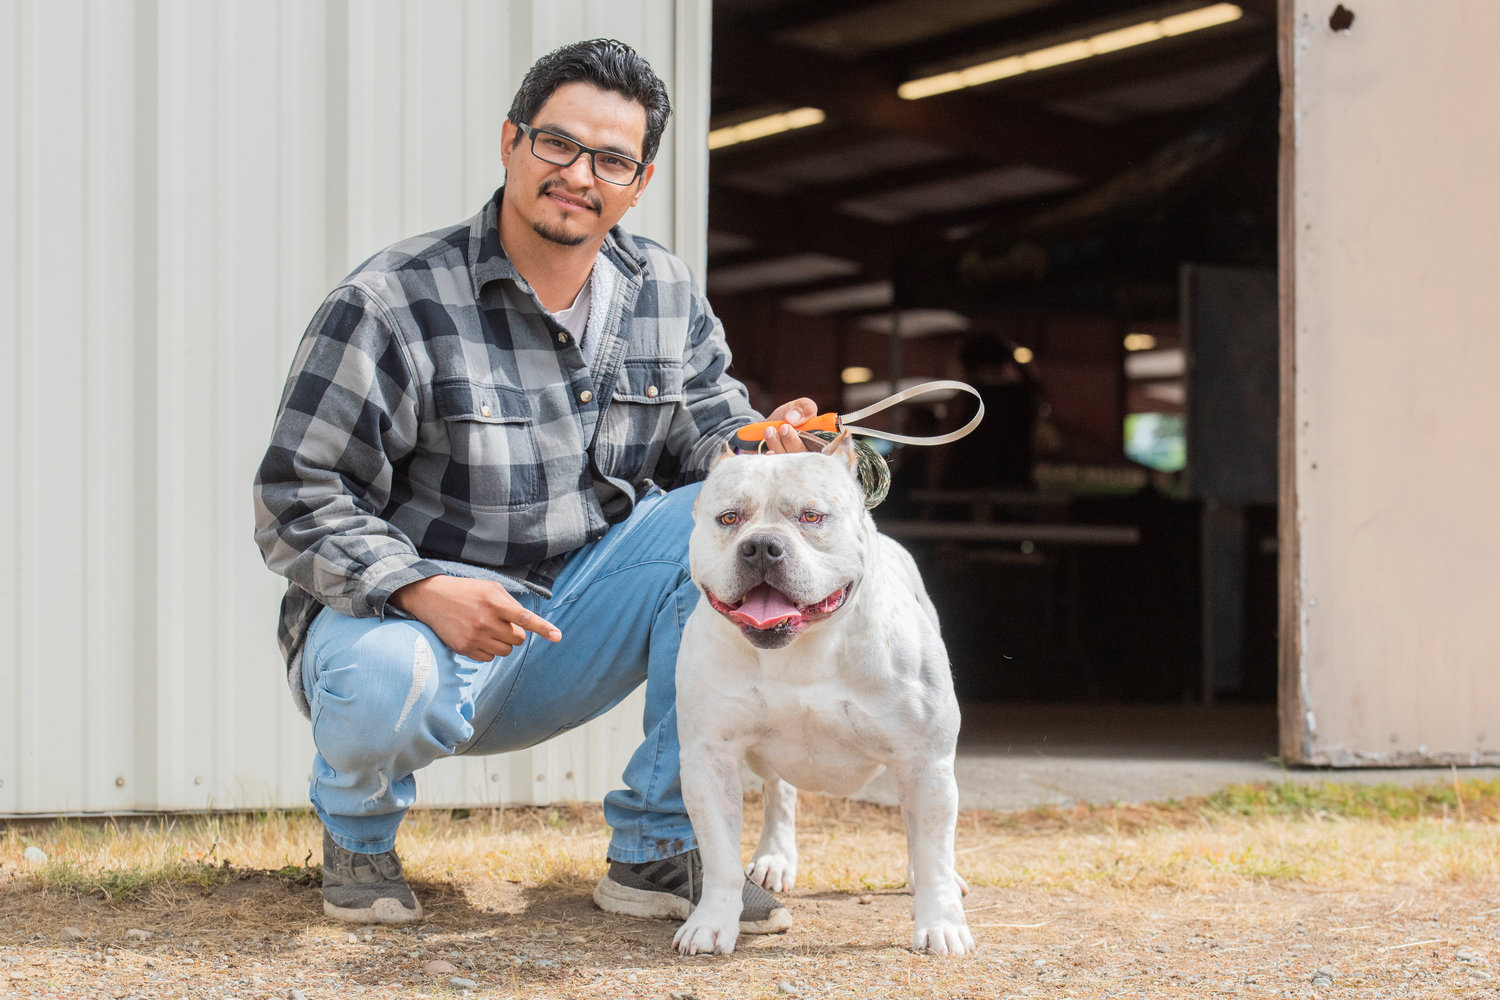 Luis Yanez poses for a photo with Bronx, an American Bully, at the Southwest Washington Fairgrounds Saturday morning.